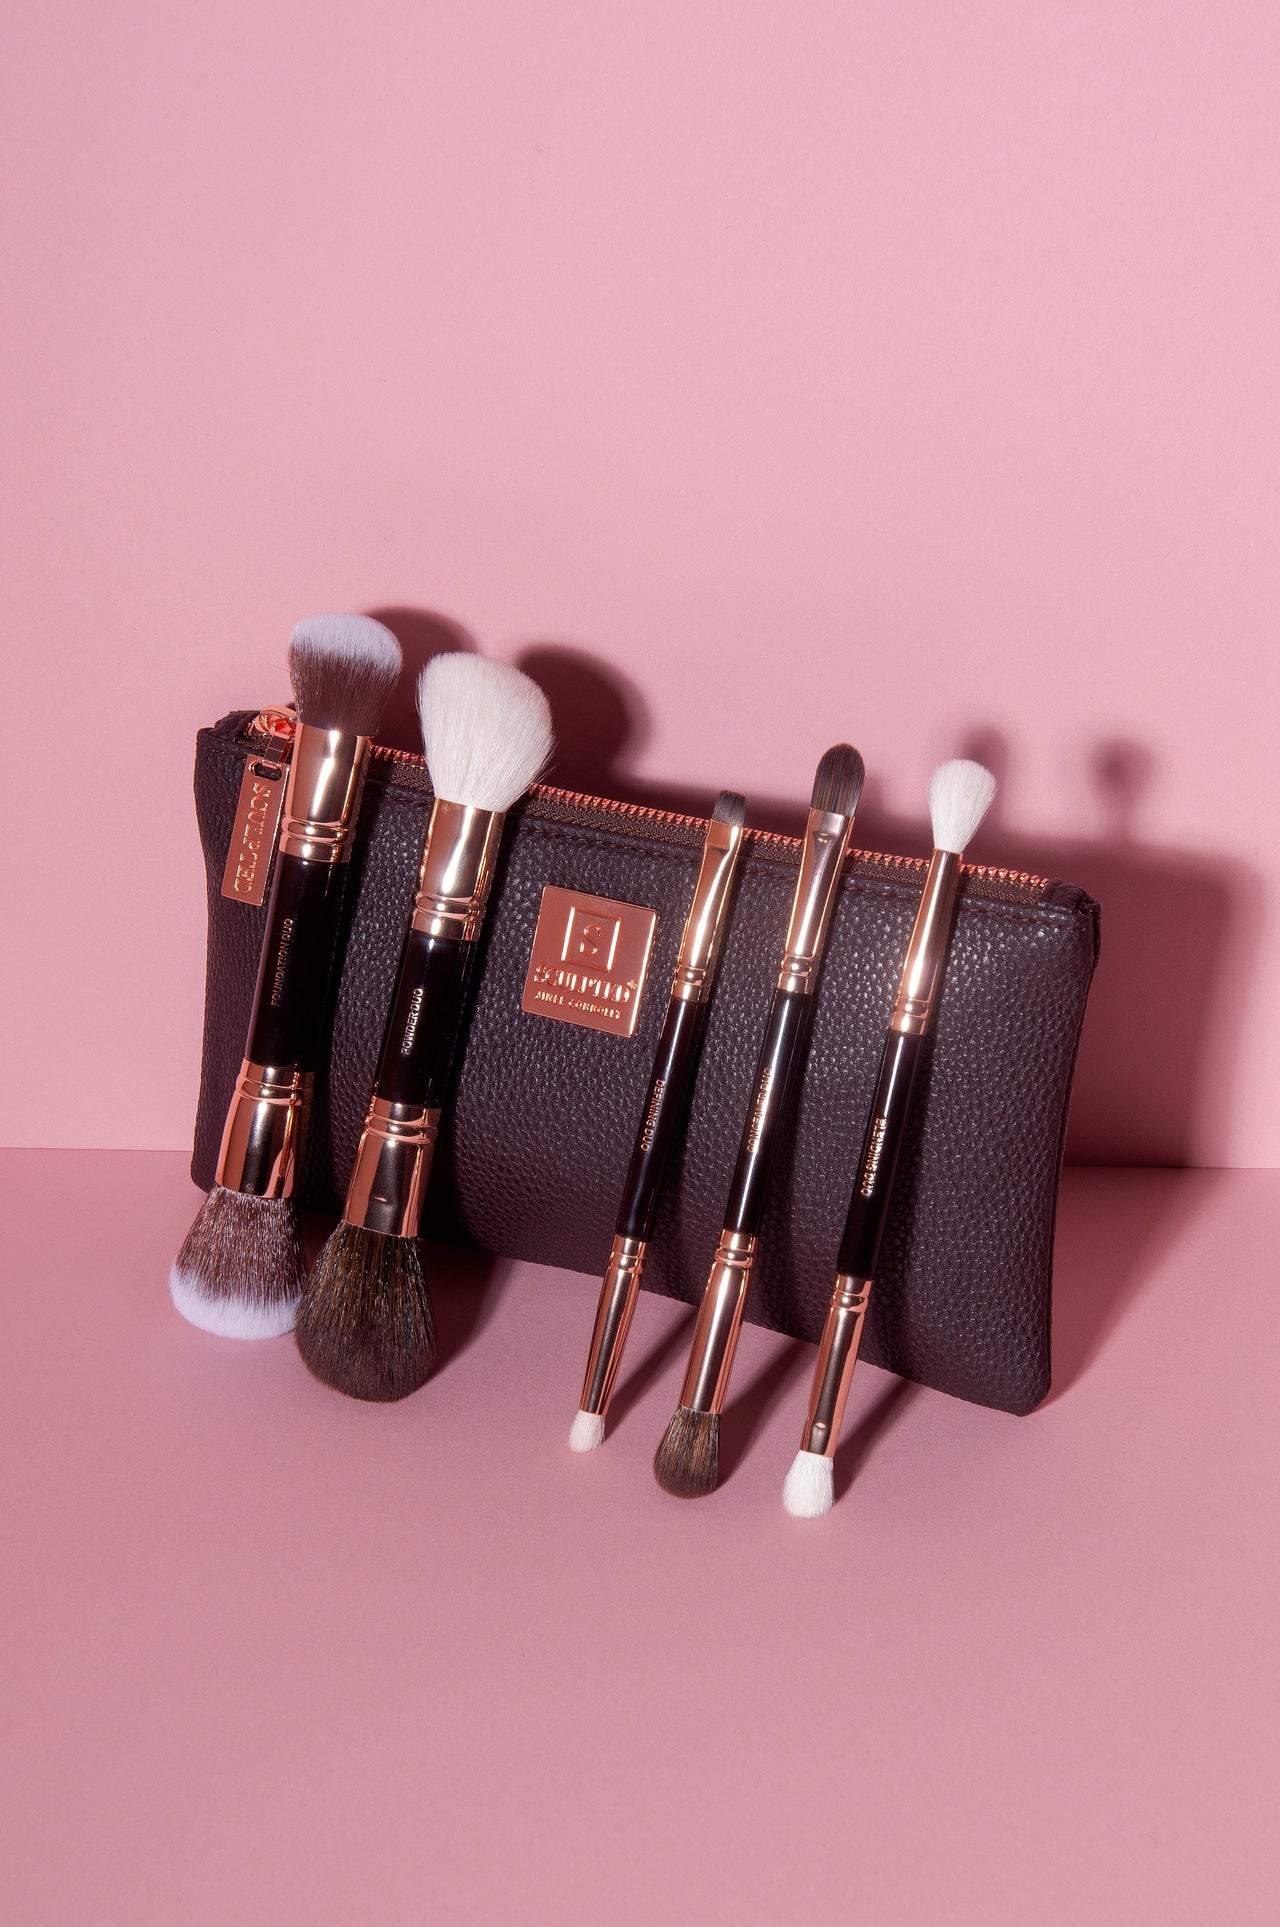 Our Essentials Volume 2 Brush Set- What's Inside?